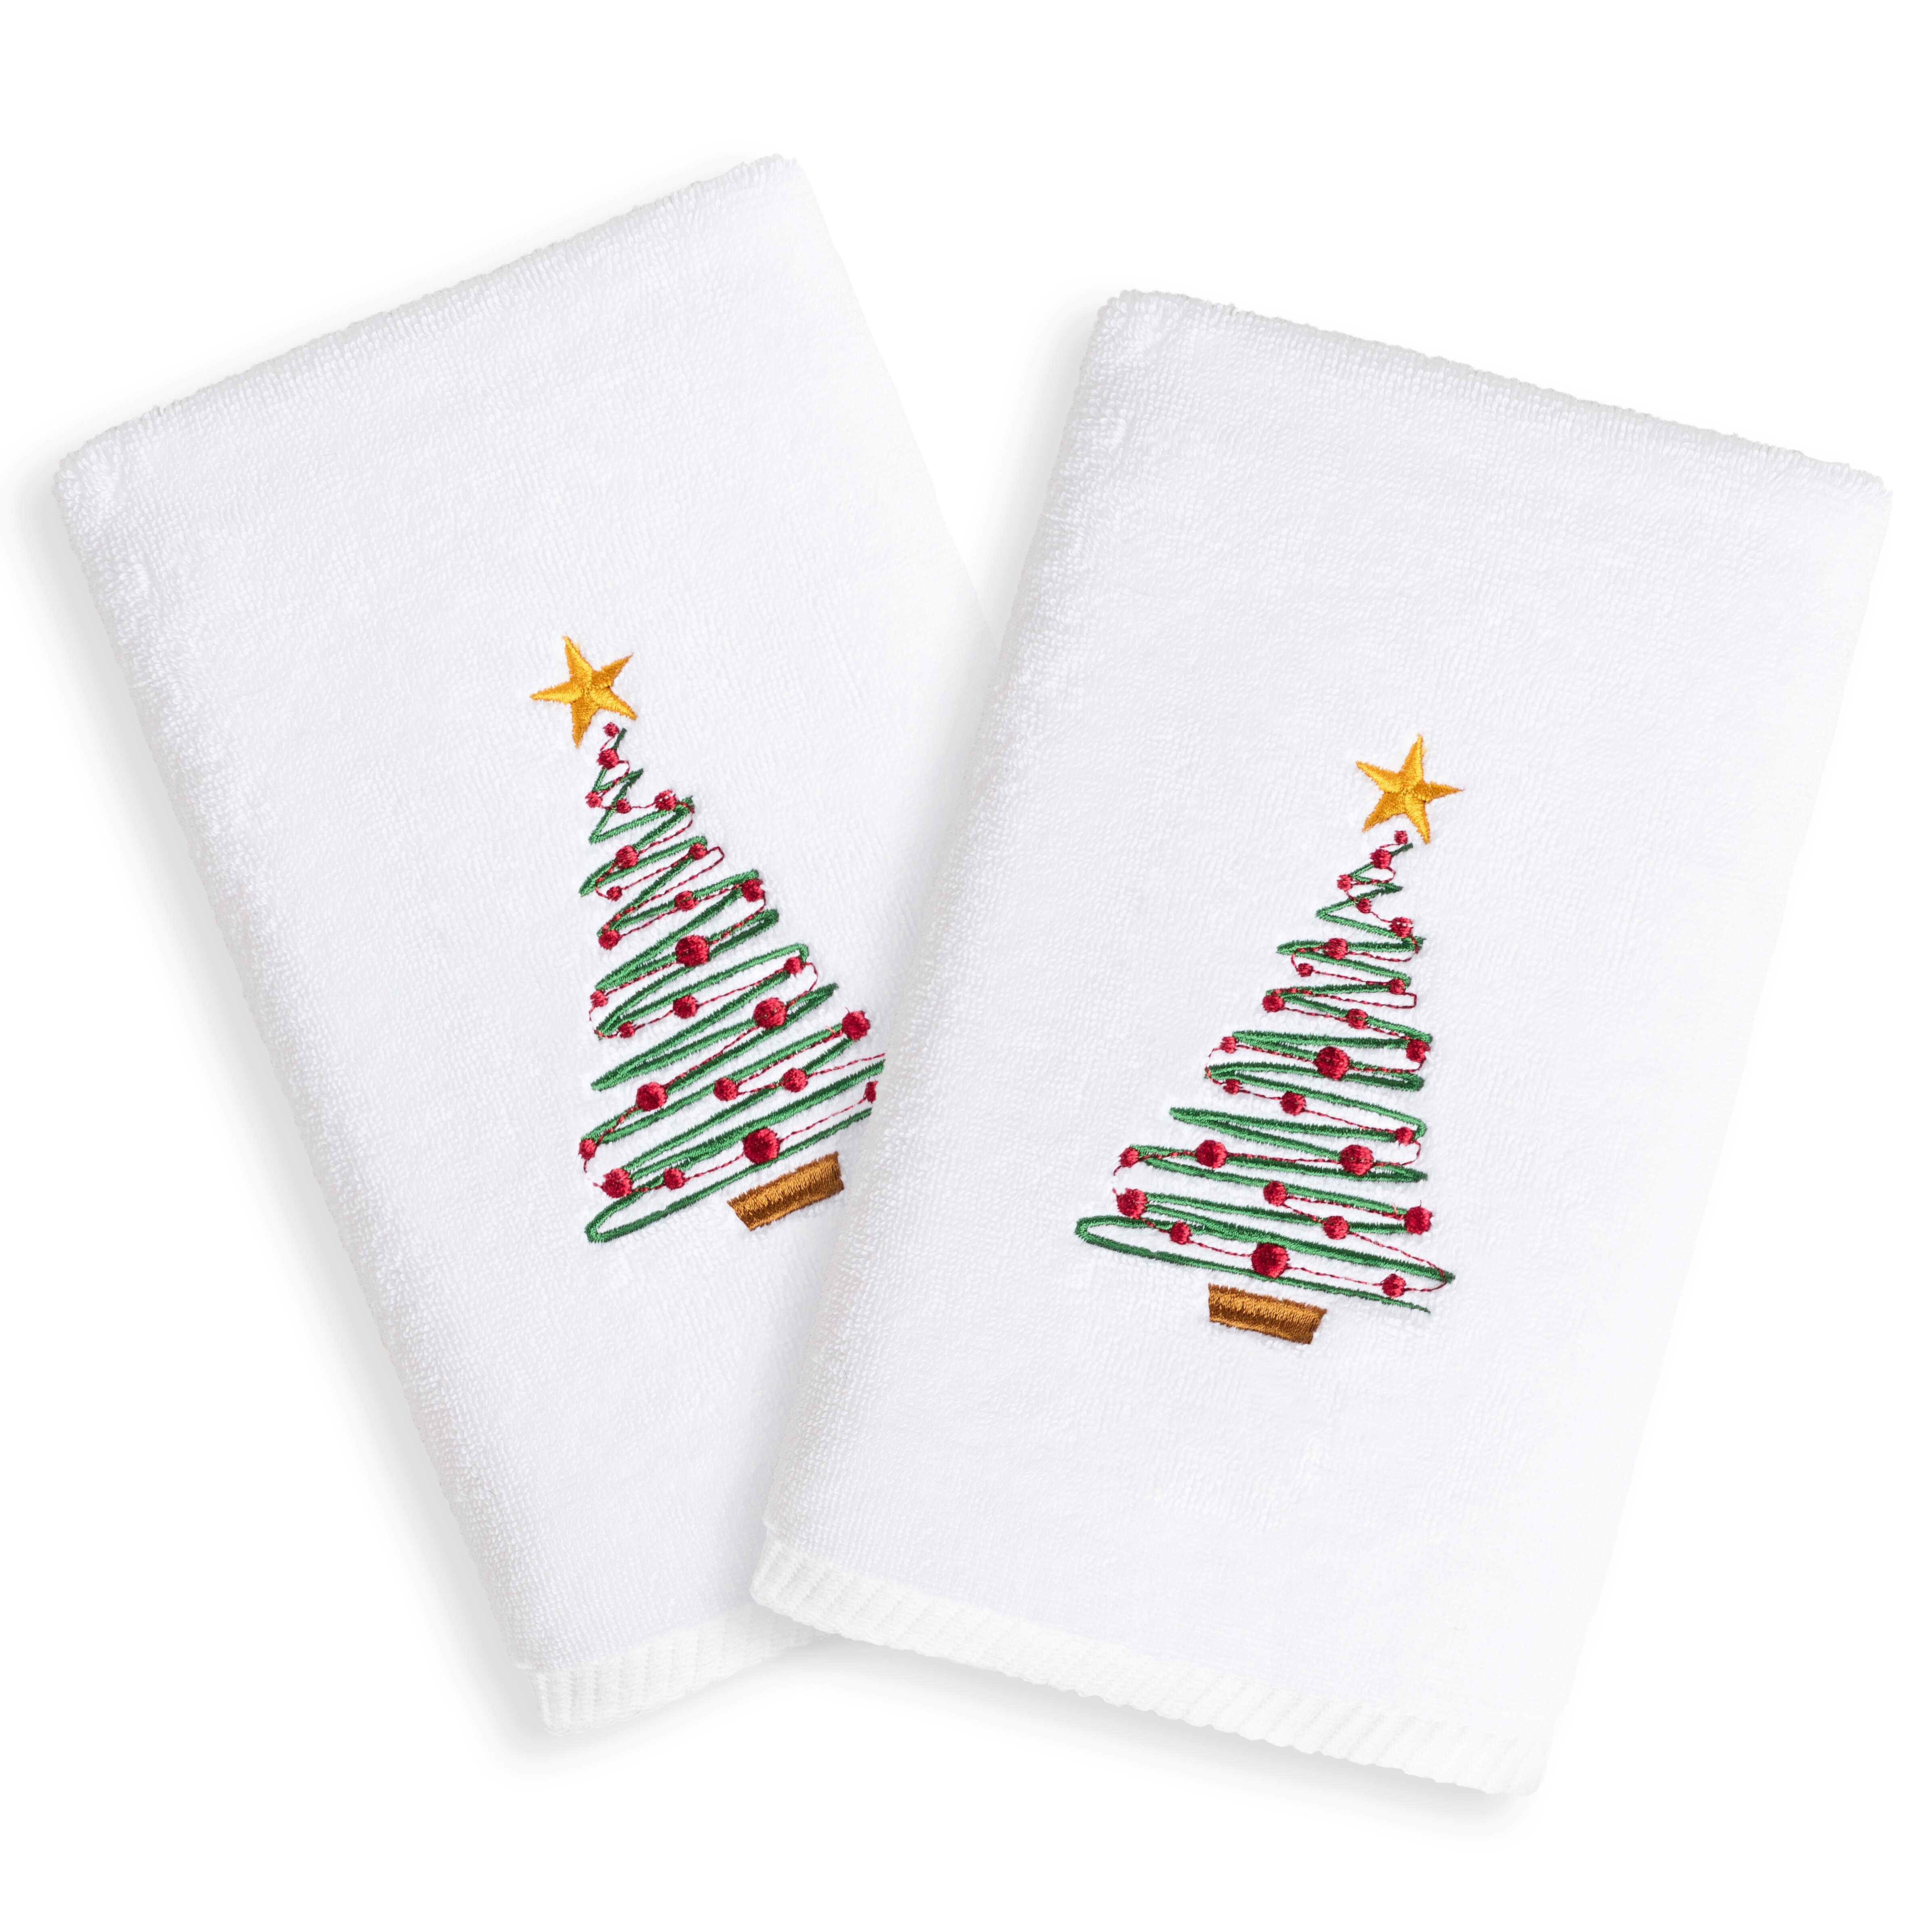 Retro Cruising Santa EMBROIDERED BATH HAND TOWELS SET OF 2 NEW UNIQUE by laura 